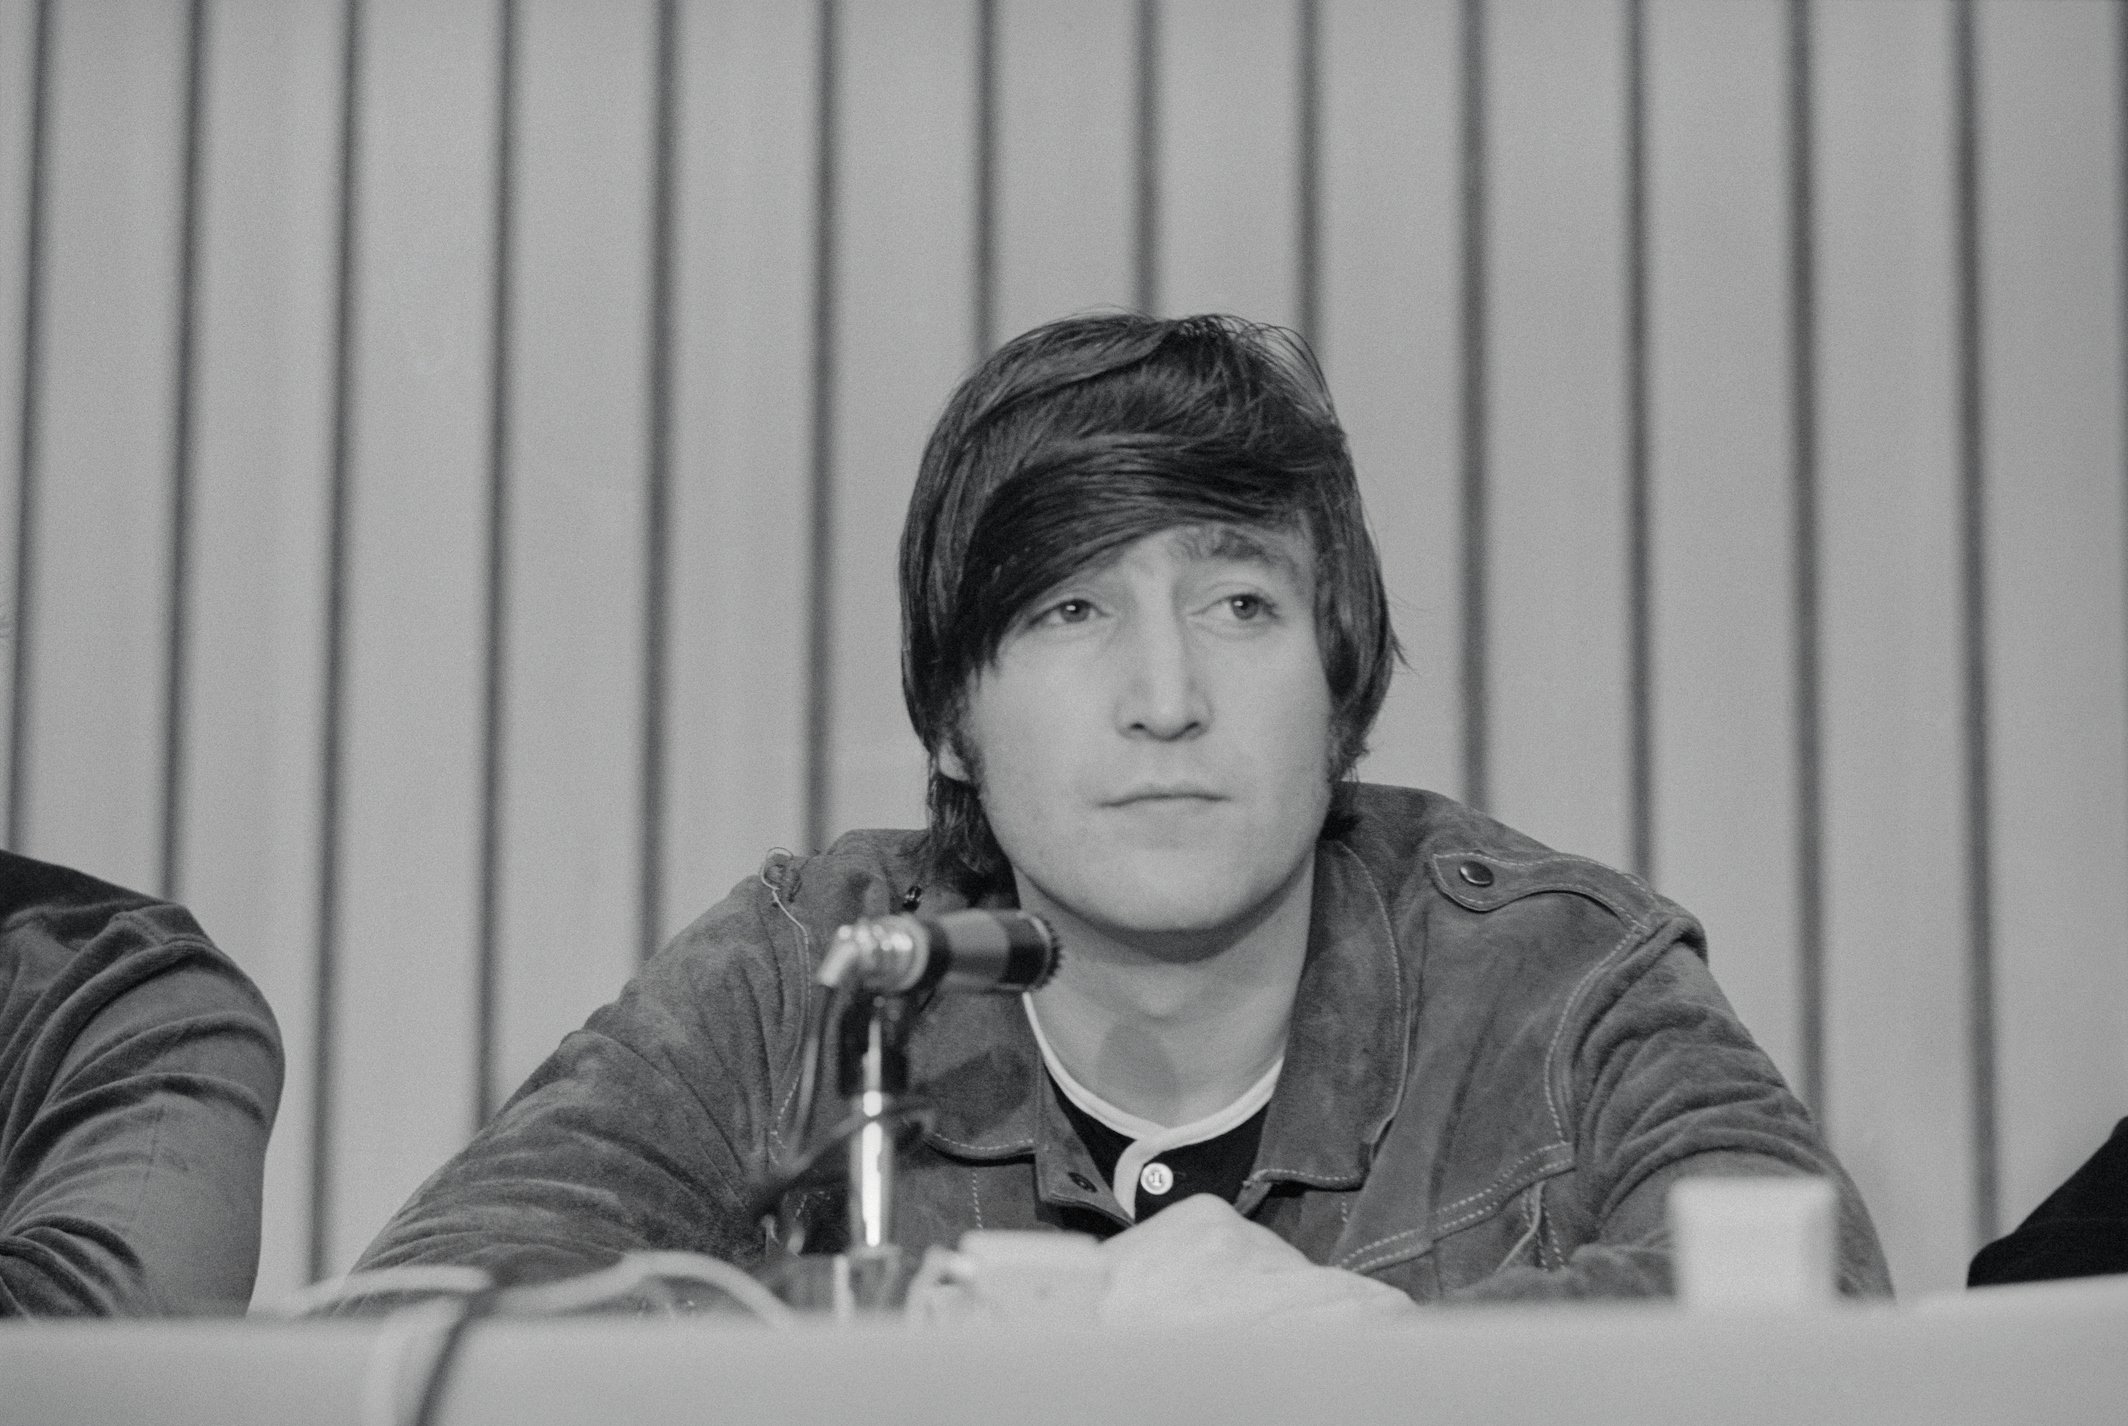 John Lennon attends a press conference for The Beatles after a performance in Portland